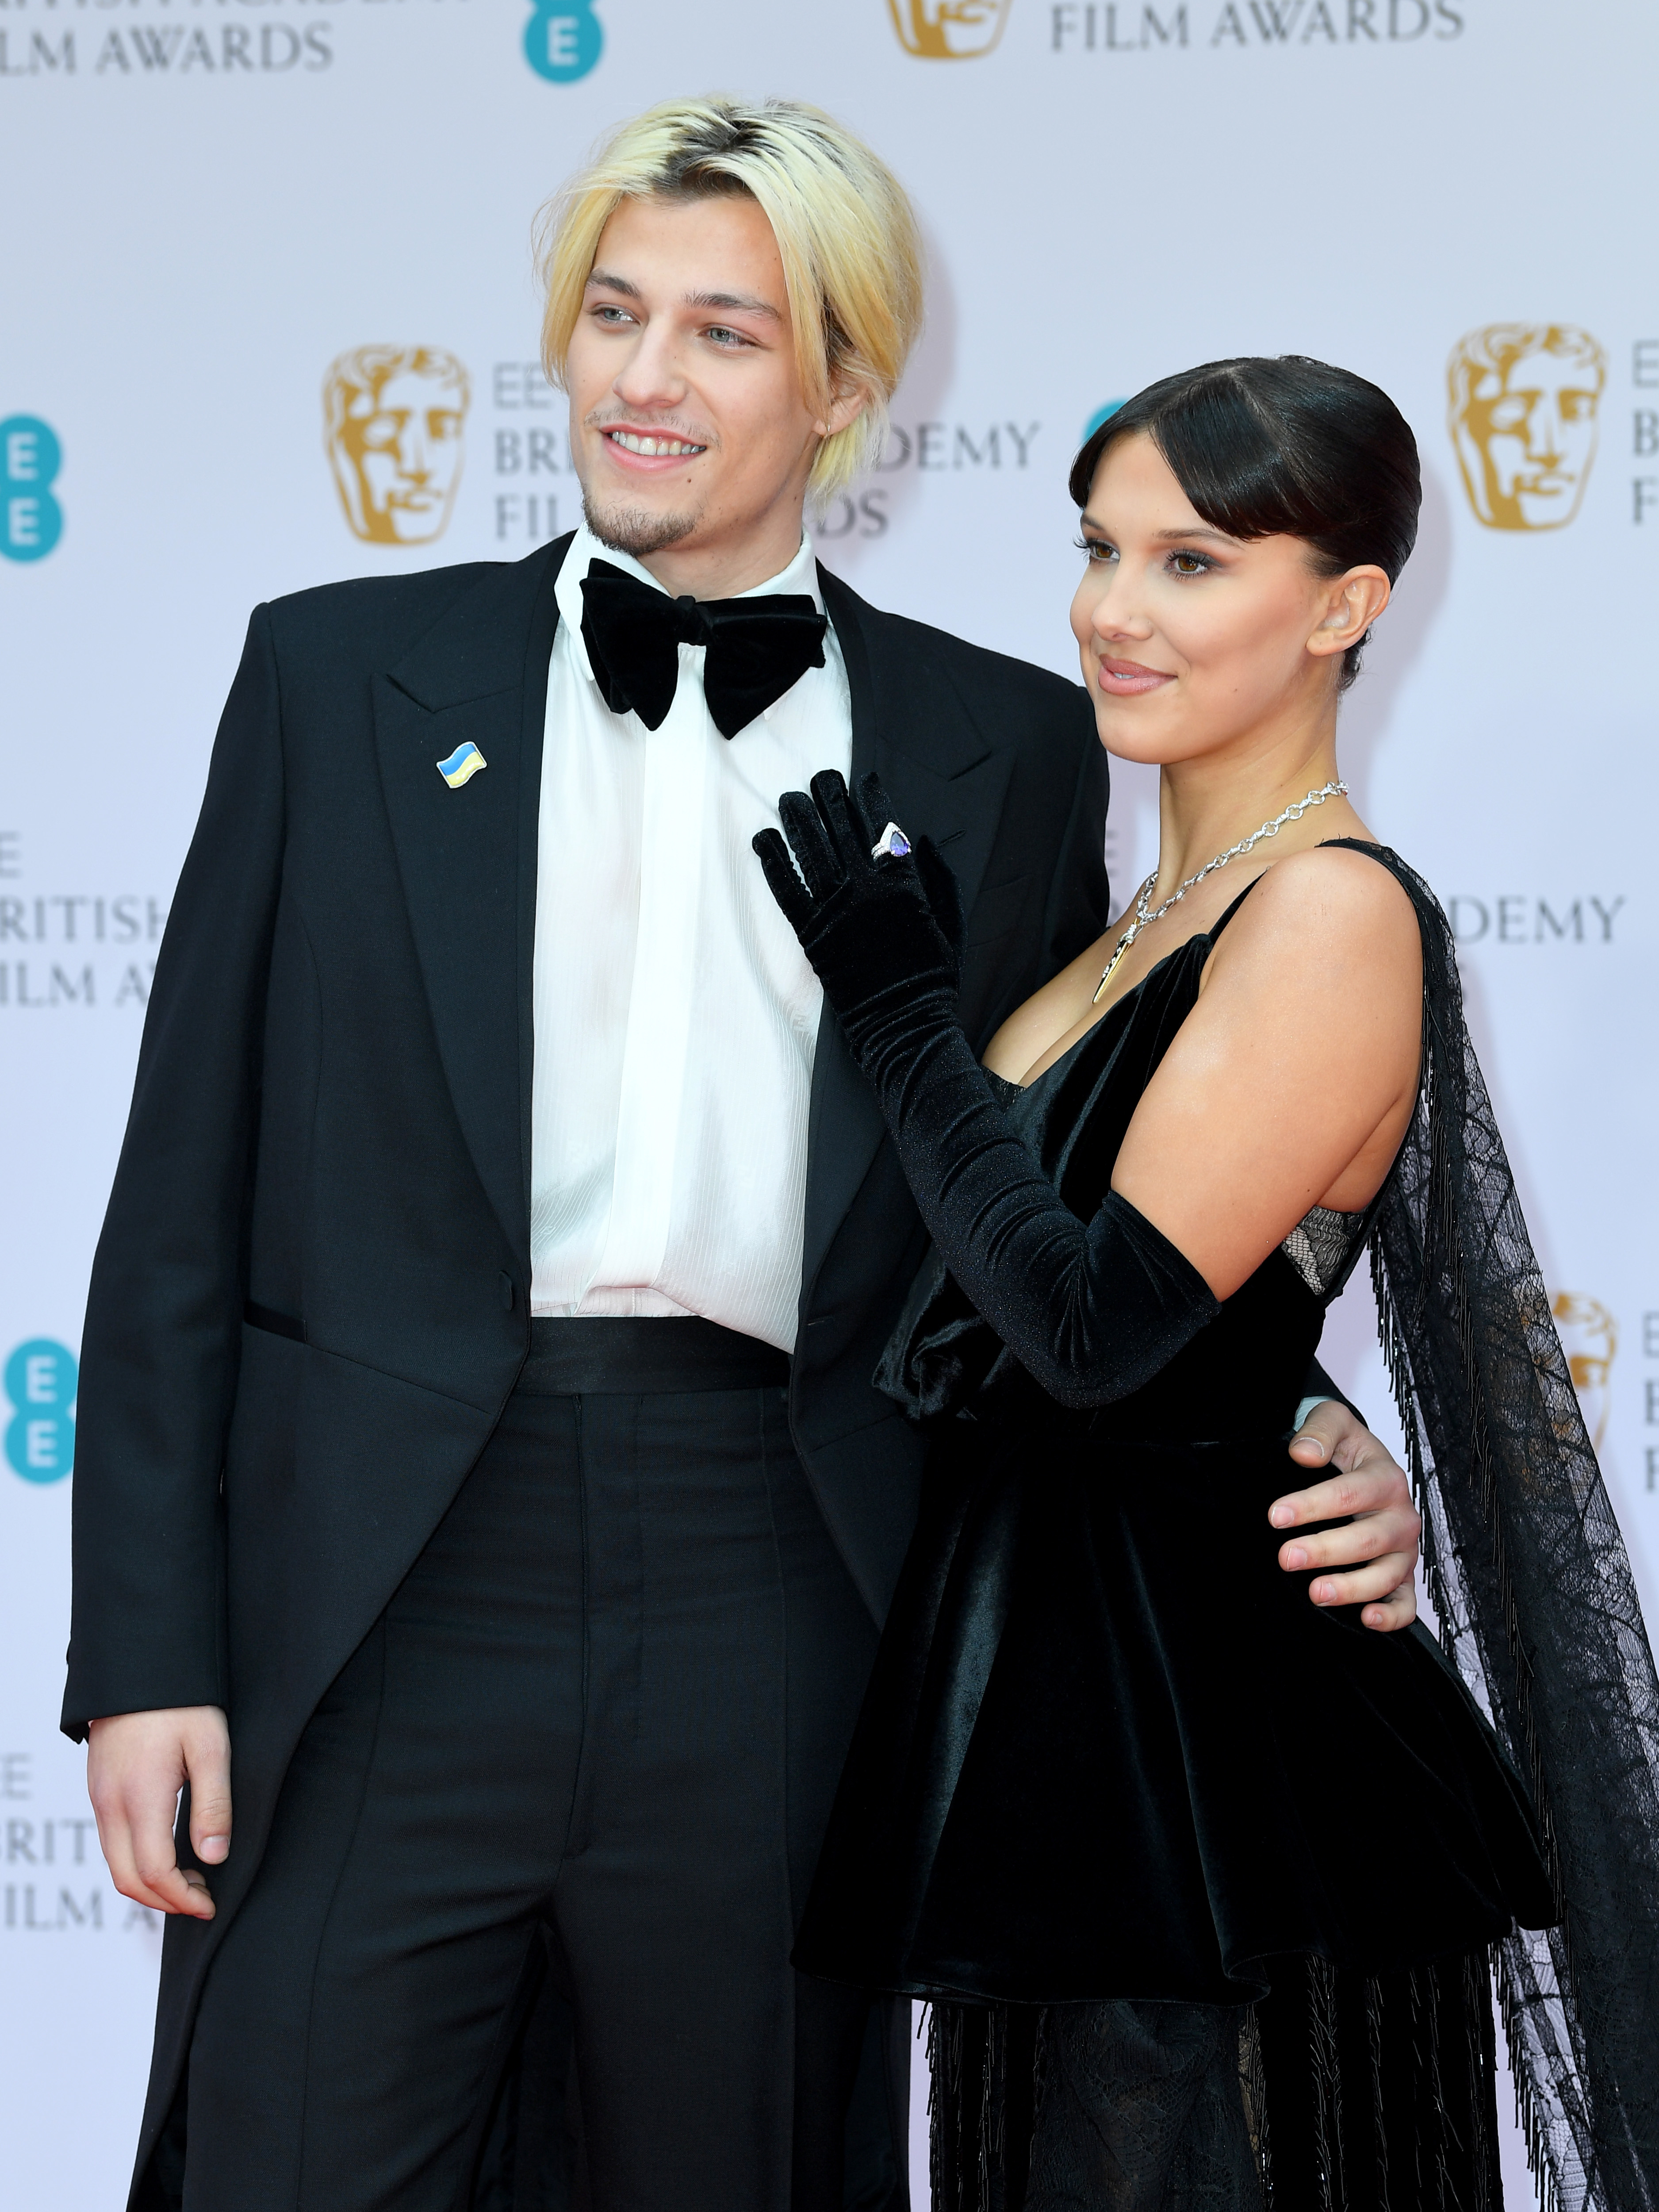 The couple with their arms around each other at the BAFTAs